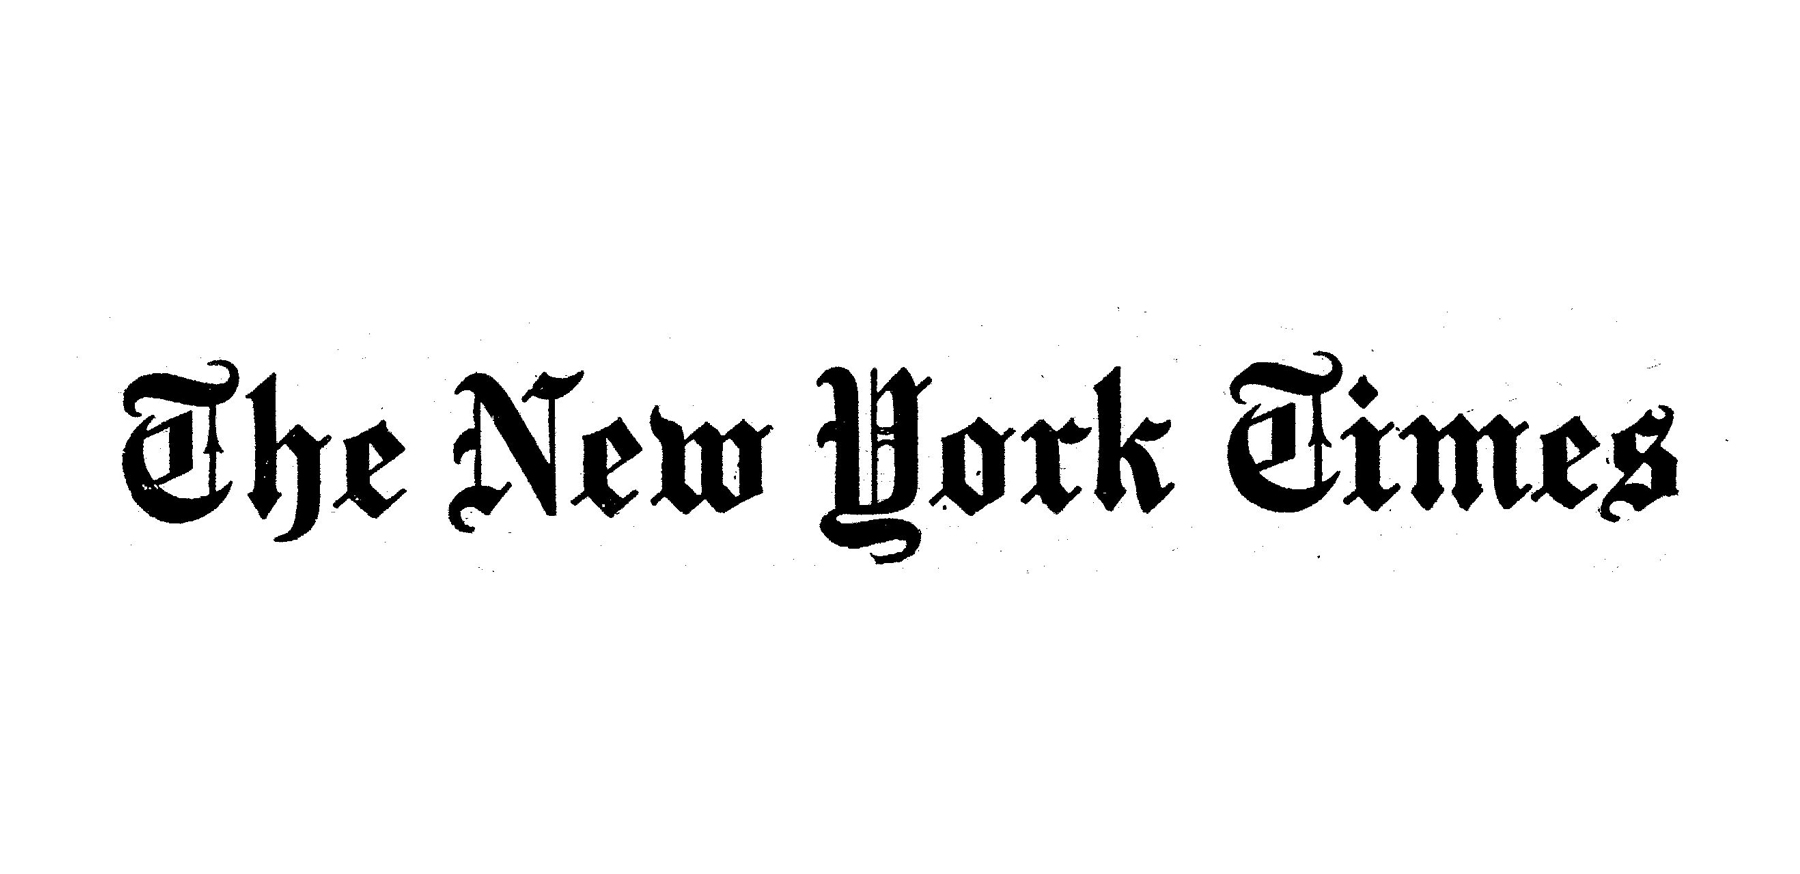 And Just Like That …' Has an Obsession With Logos - The New York Times